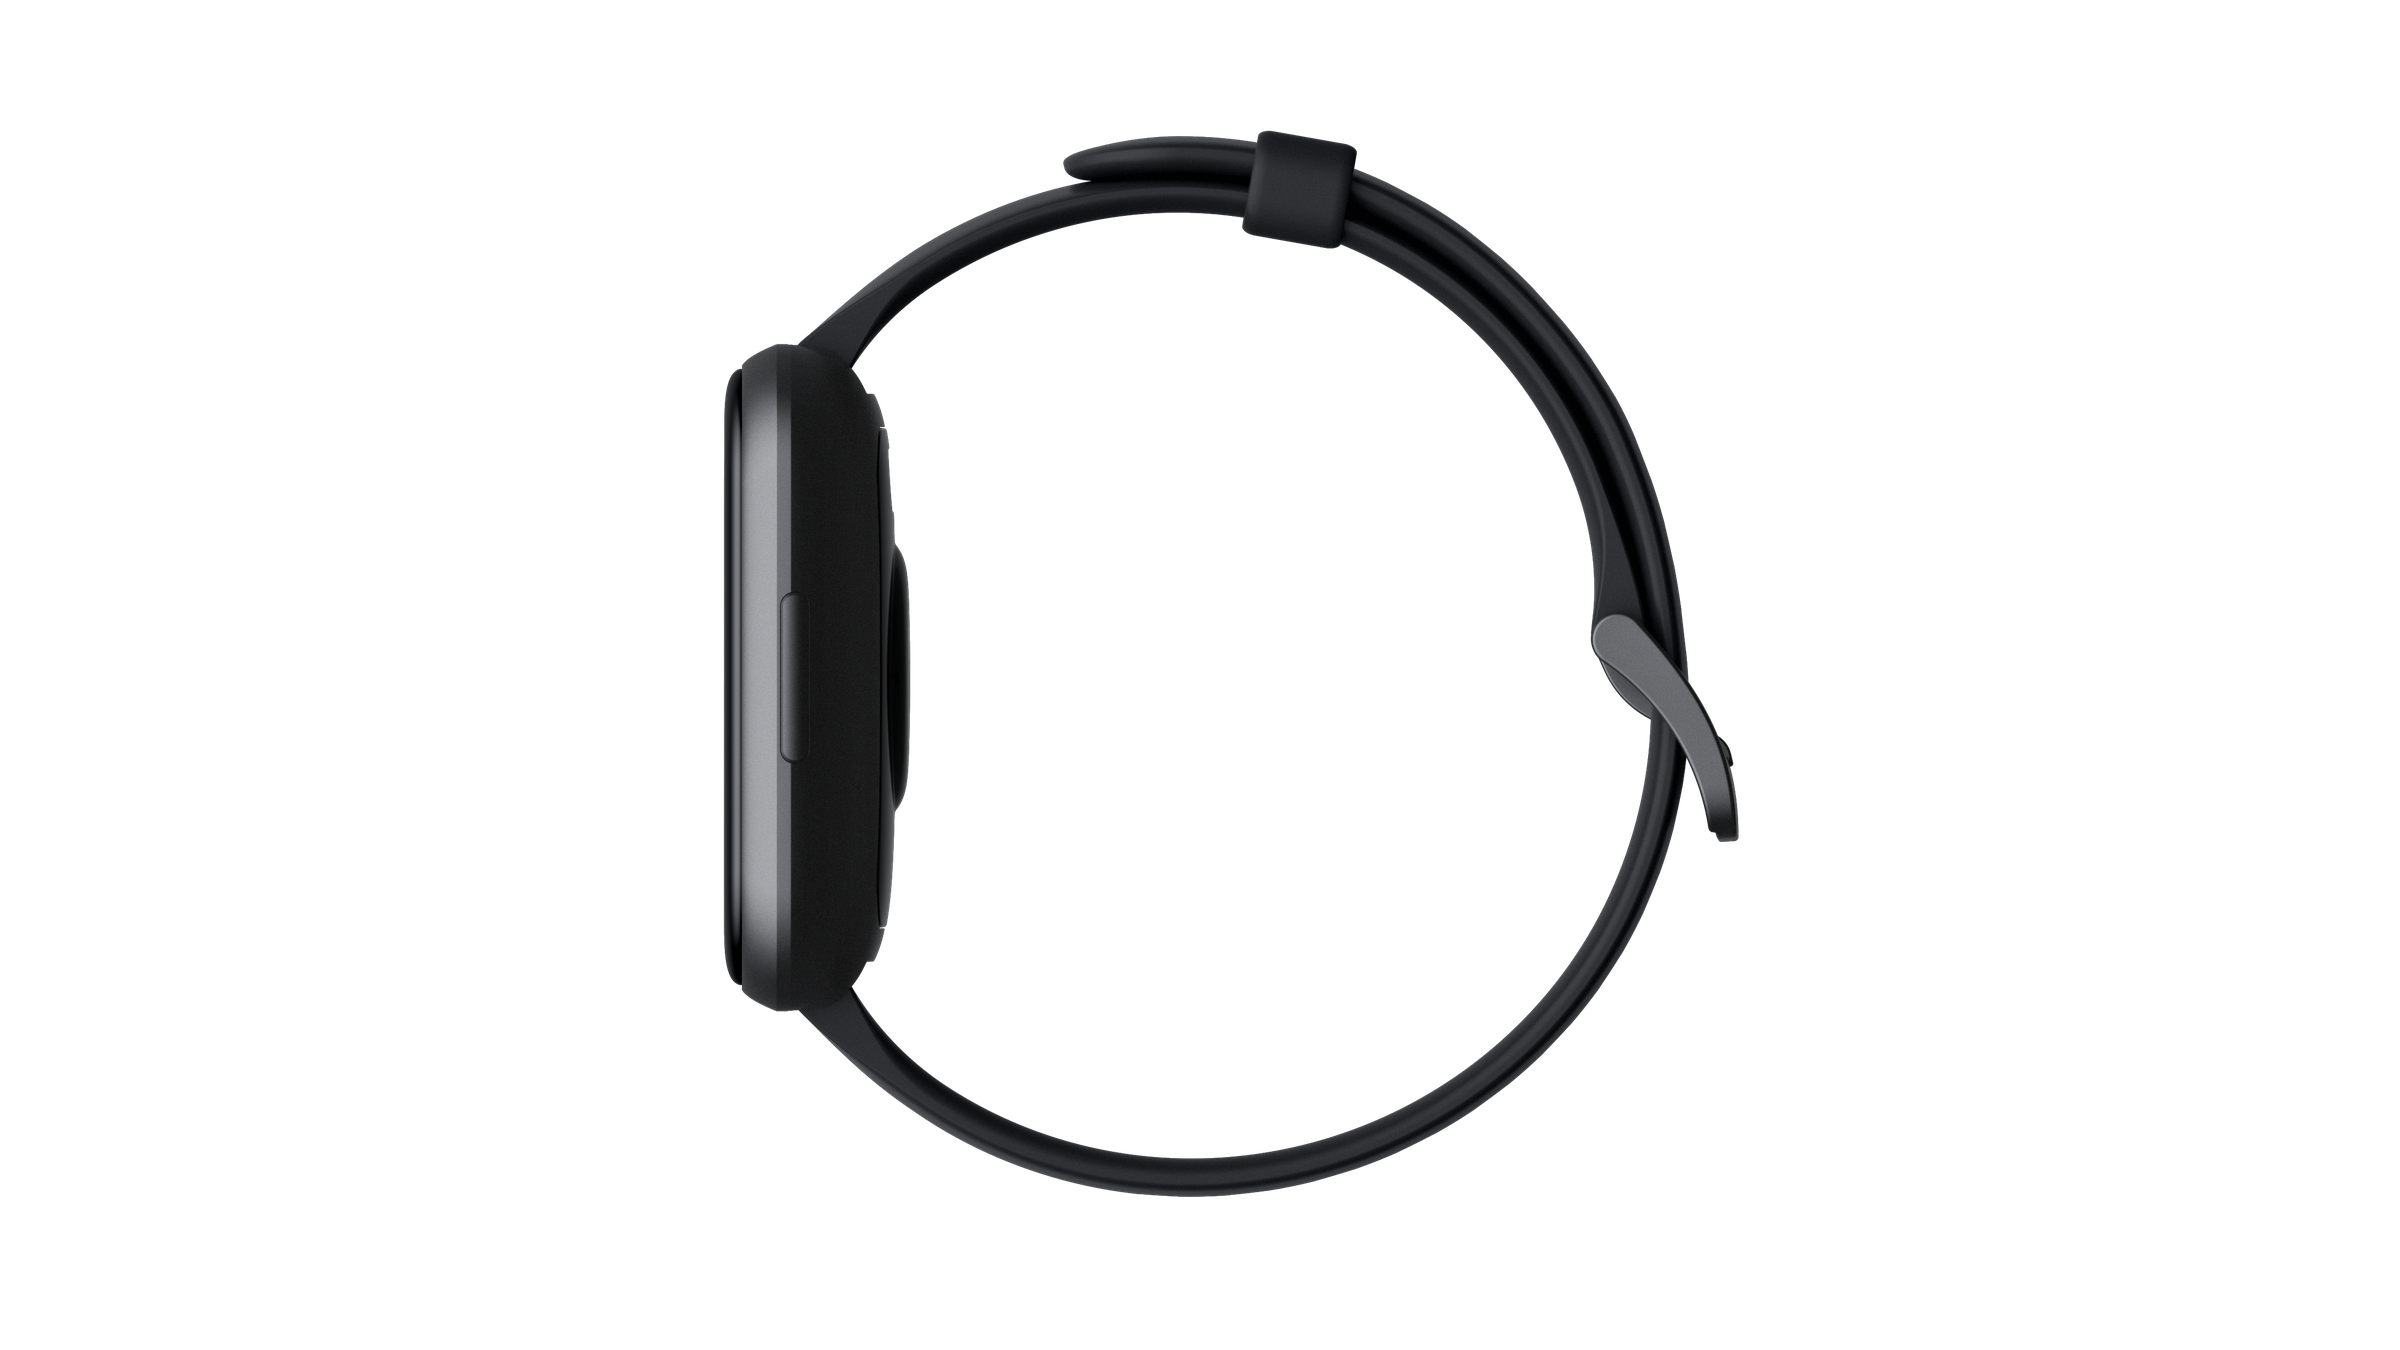 The Wyze Watch will ship in February.